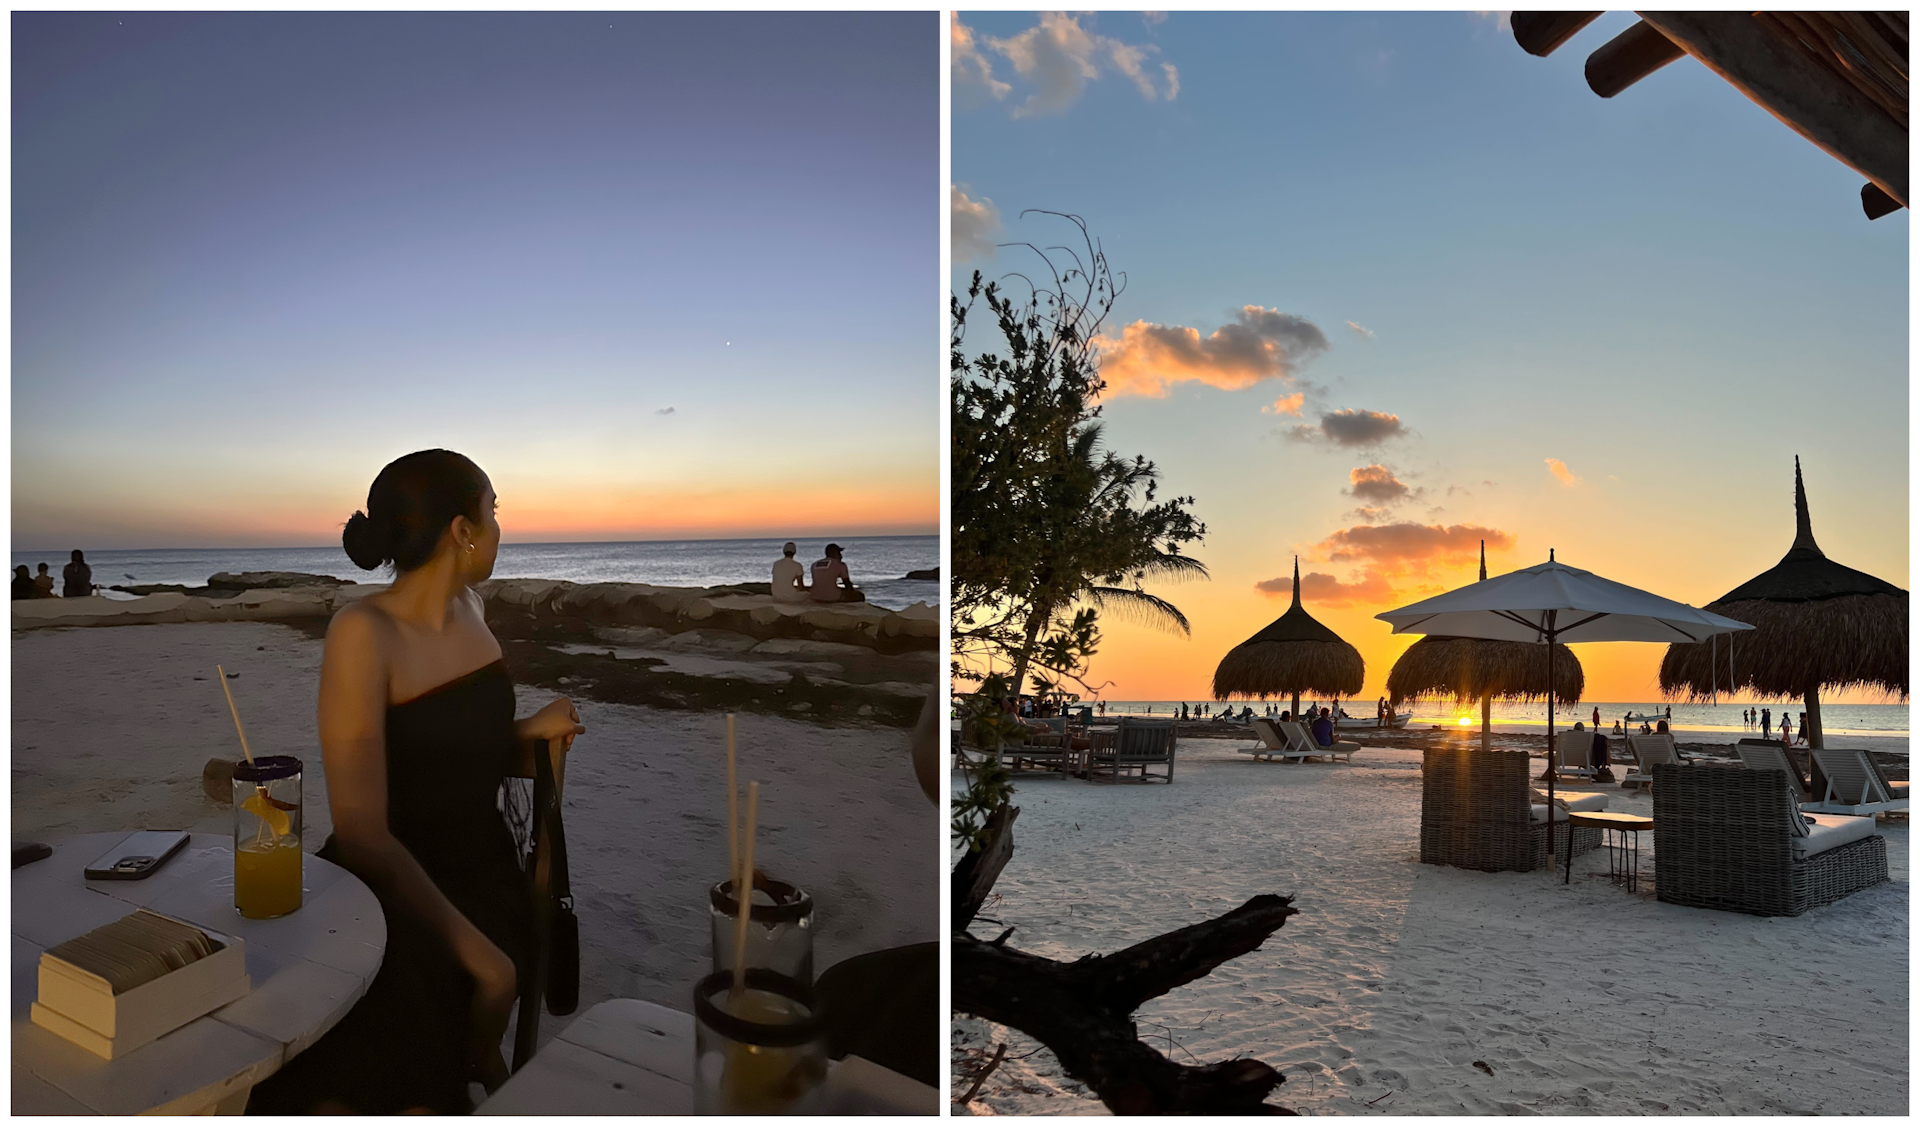 Serina watching the sunset on Isla Holbox from a beach club